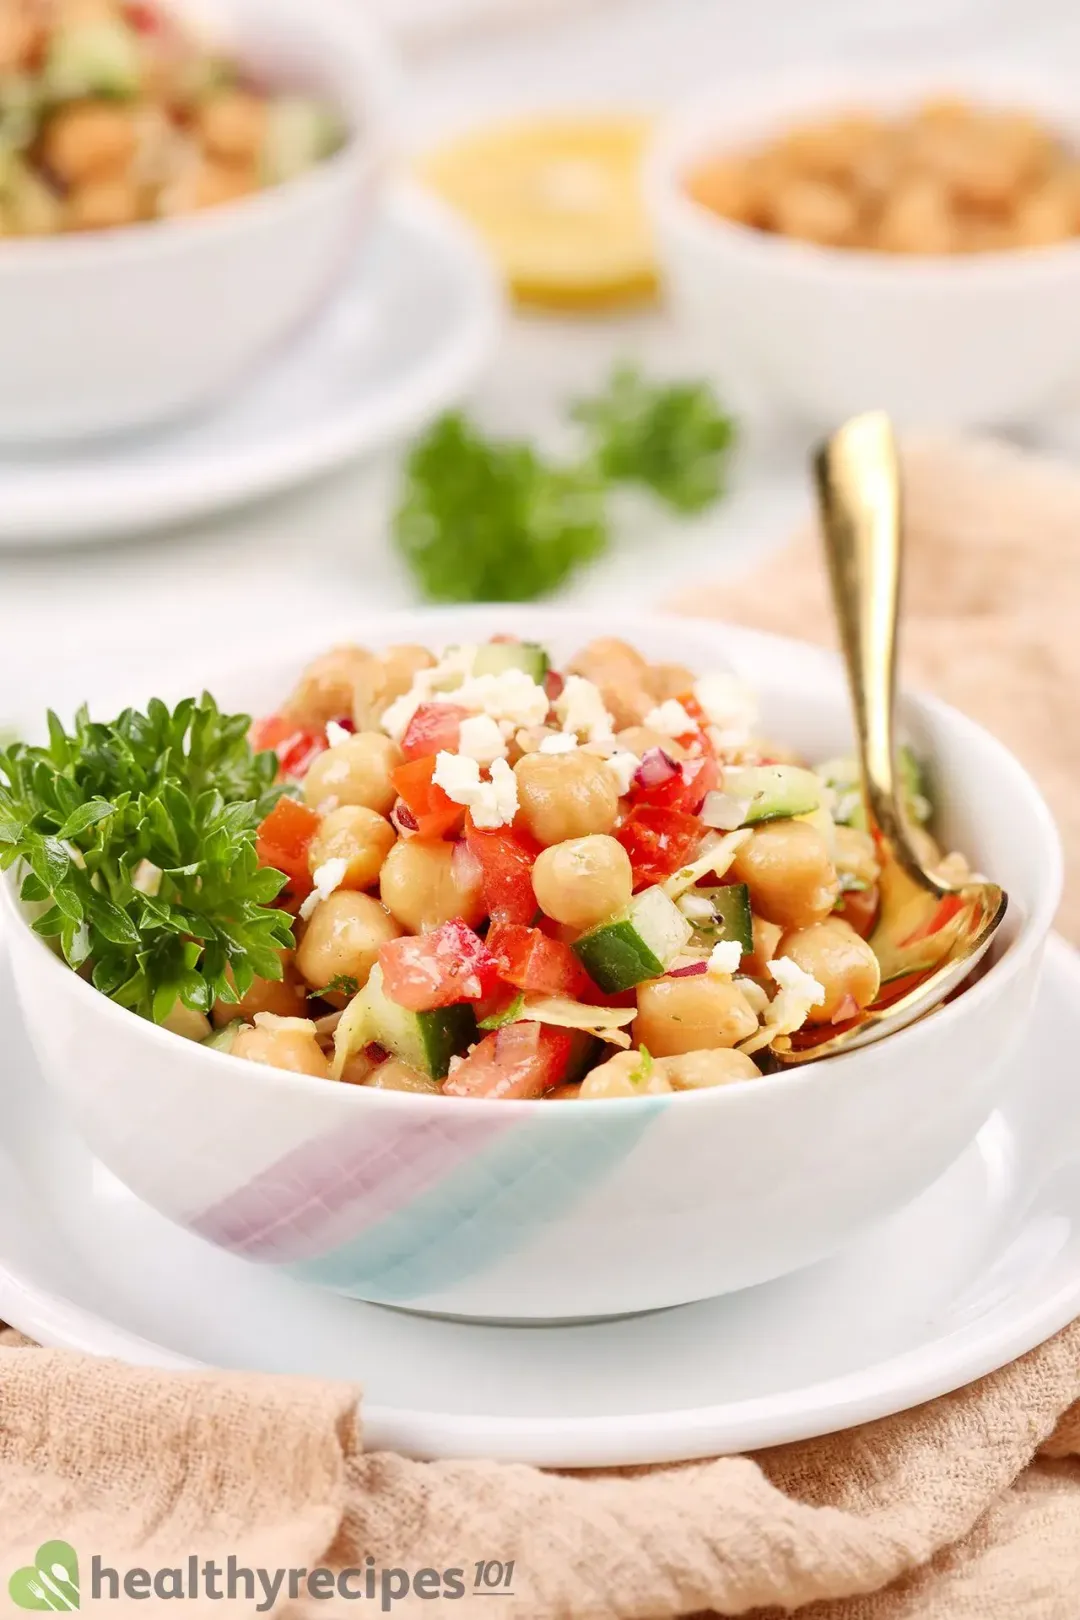 Is Chickpea Salad Healthy